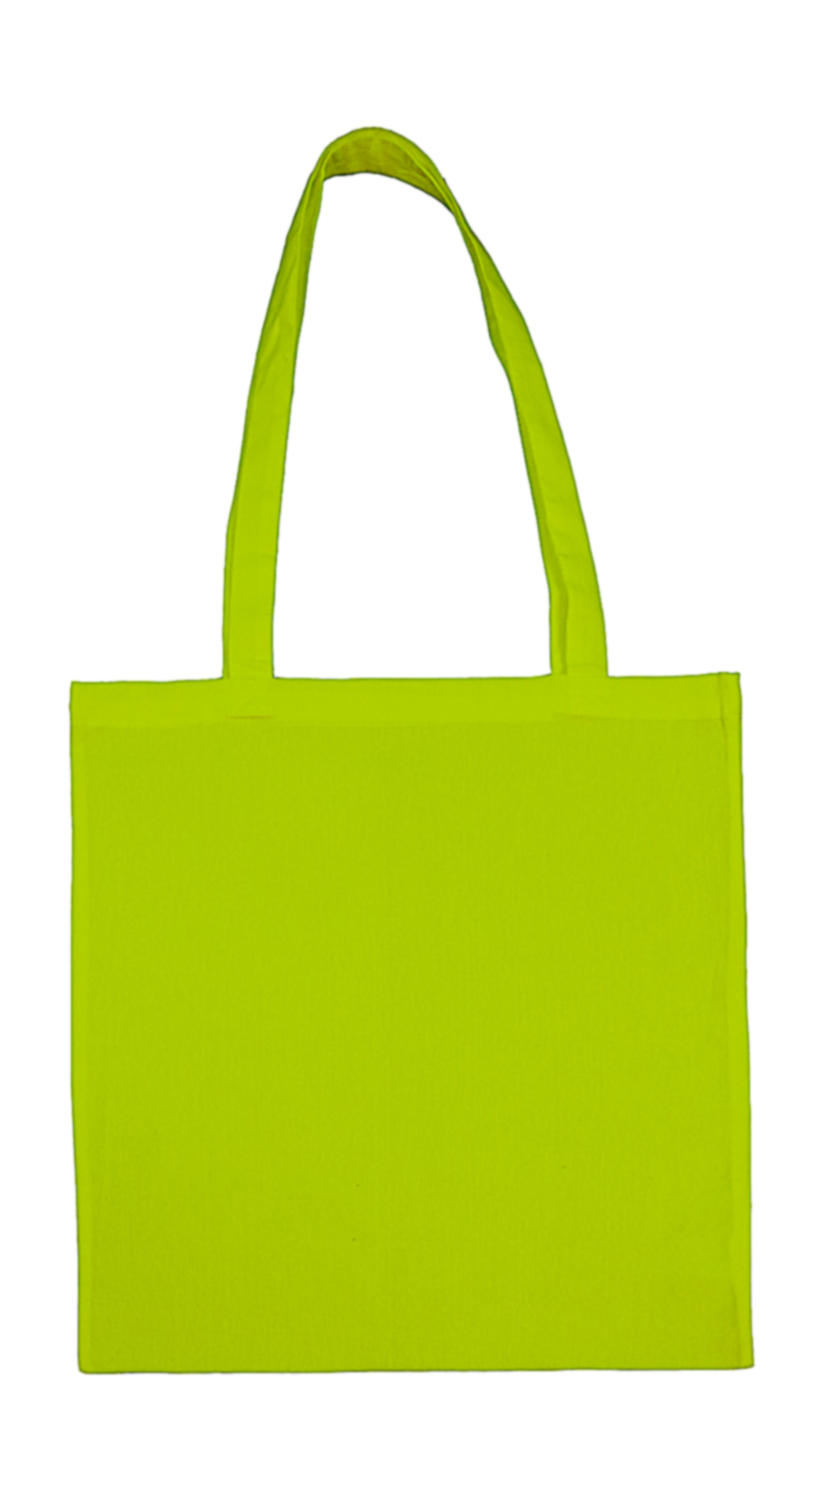  Cotton Bag LH in Farbe Lime